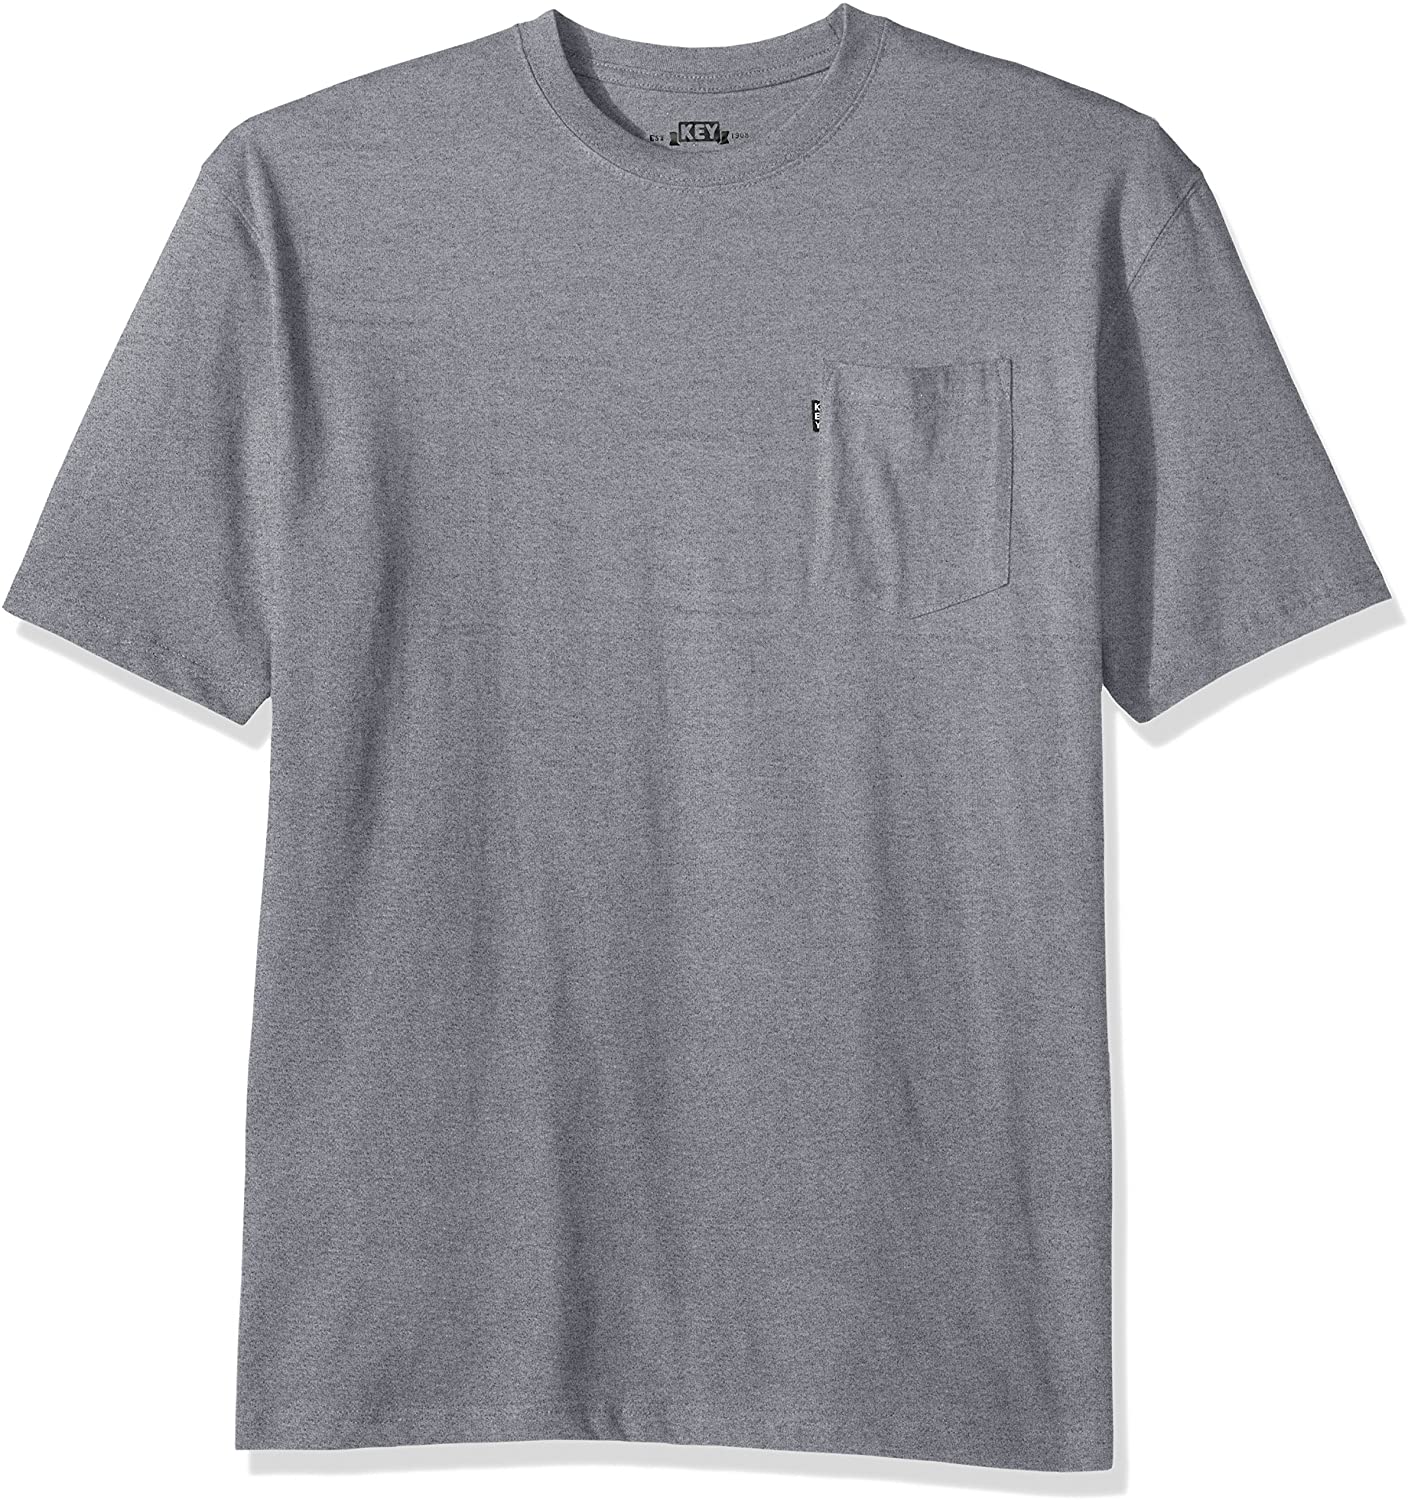 Key Apparel Men's Blended Tee Big and Tall | eBay